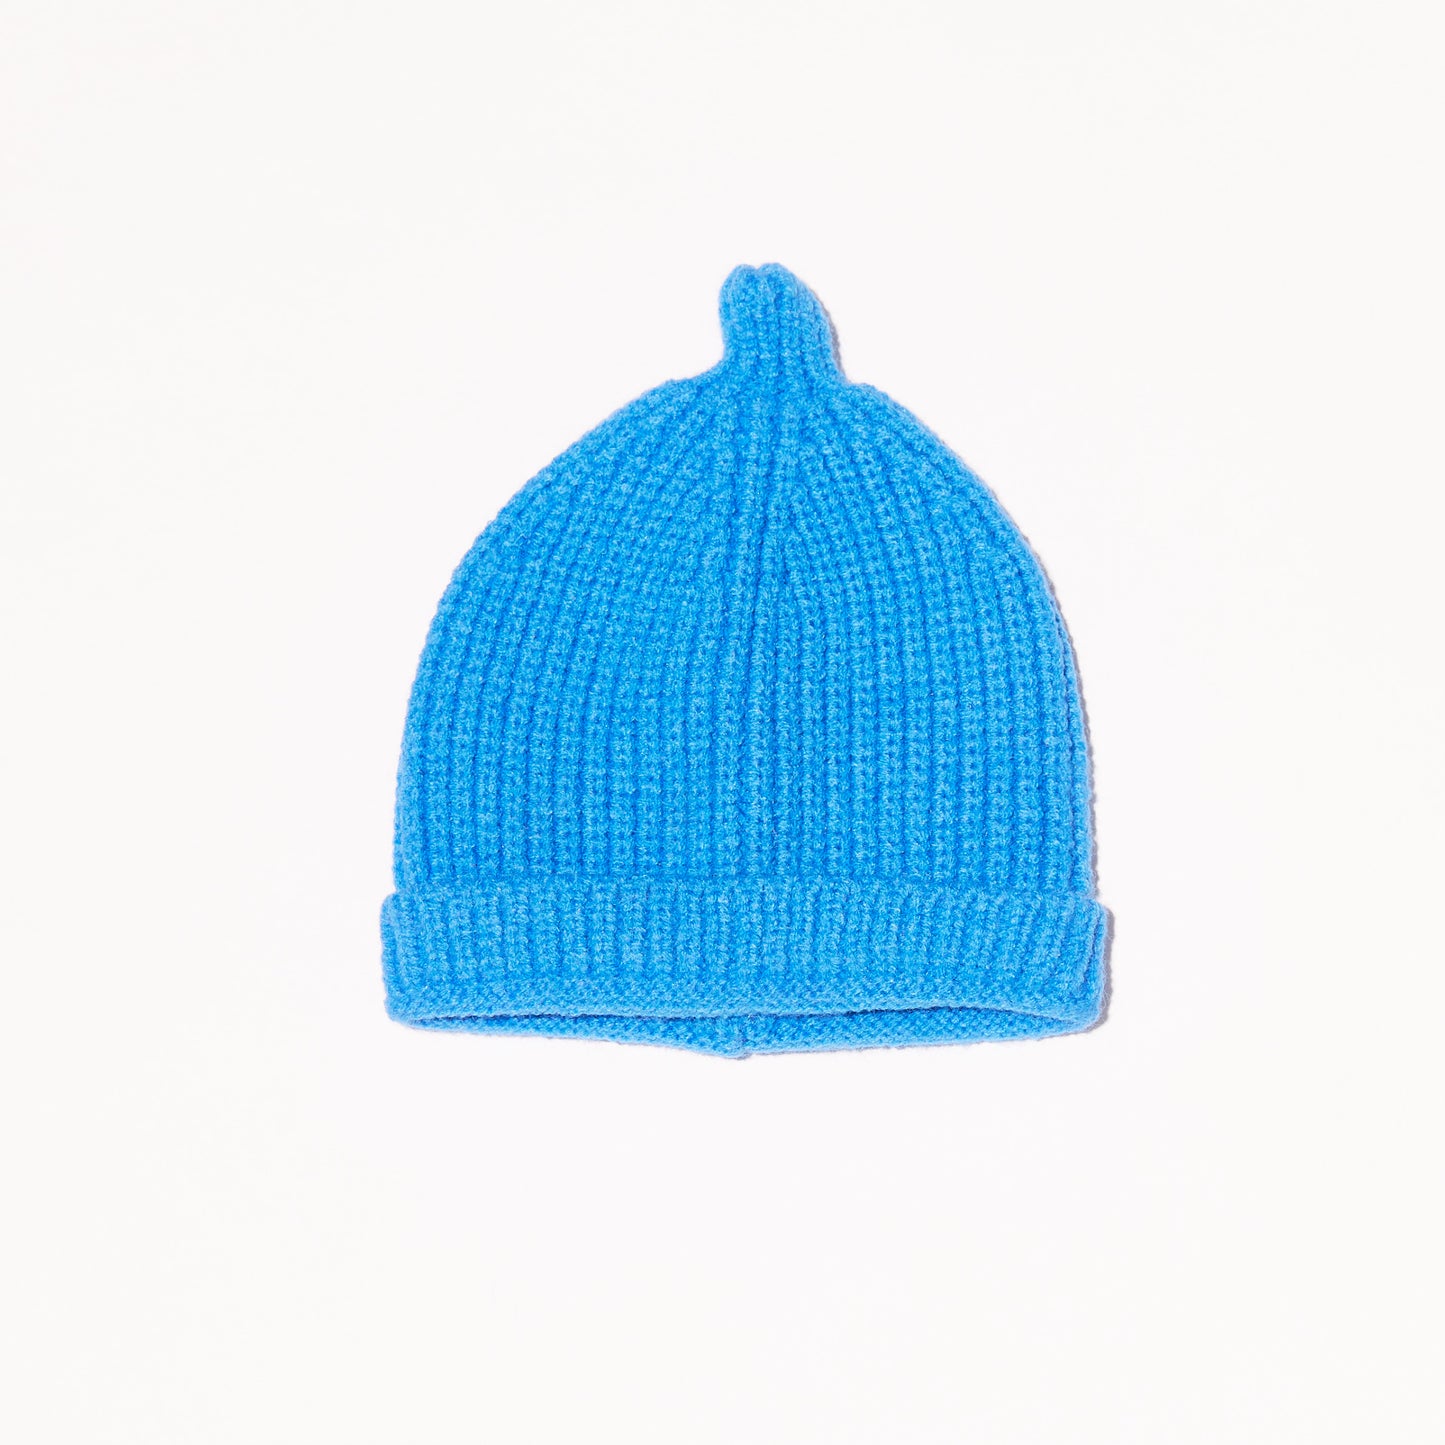 Toto Infant Beanie - One Size